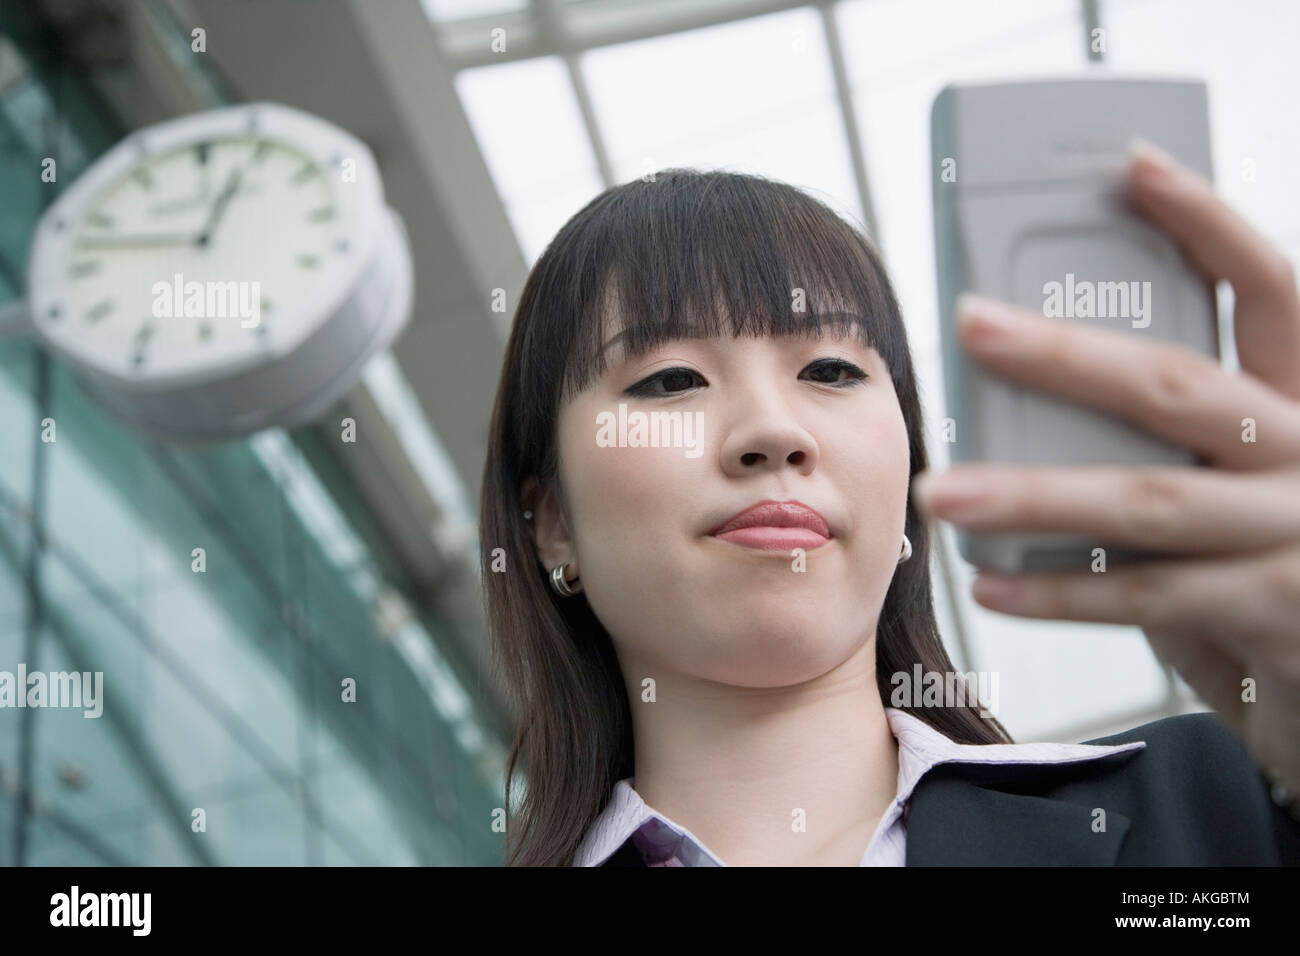 Low angle view of a businesswoman using a palmtop and waiting at an airport lounge Stock Photo